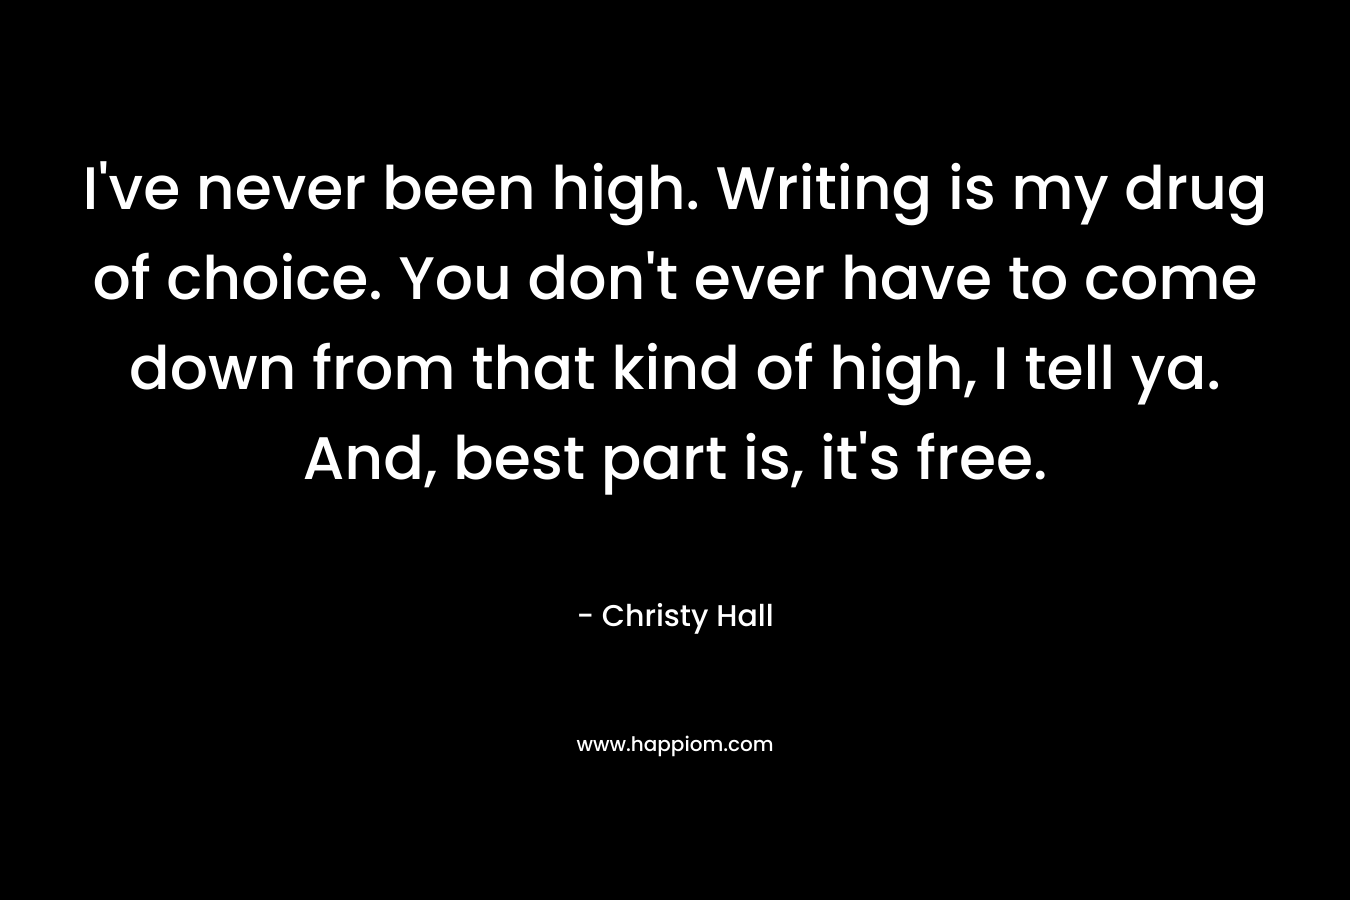 I've never been high. Writing is my drug of choice. You don't ever have to come down from that kind of high, I tell ya. And, best part is, it's free.